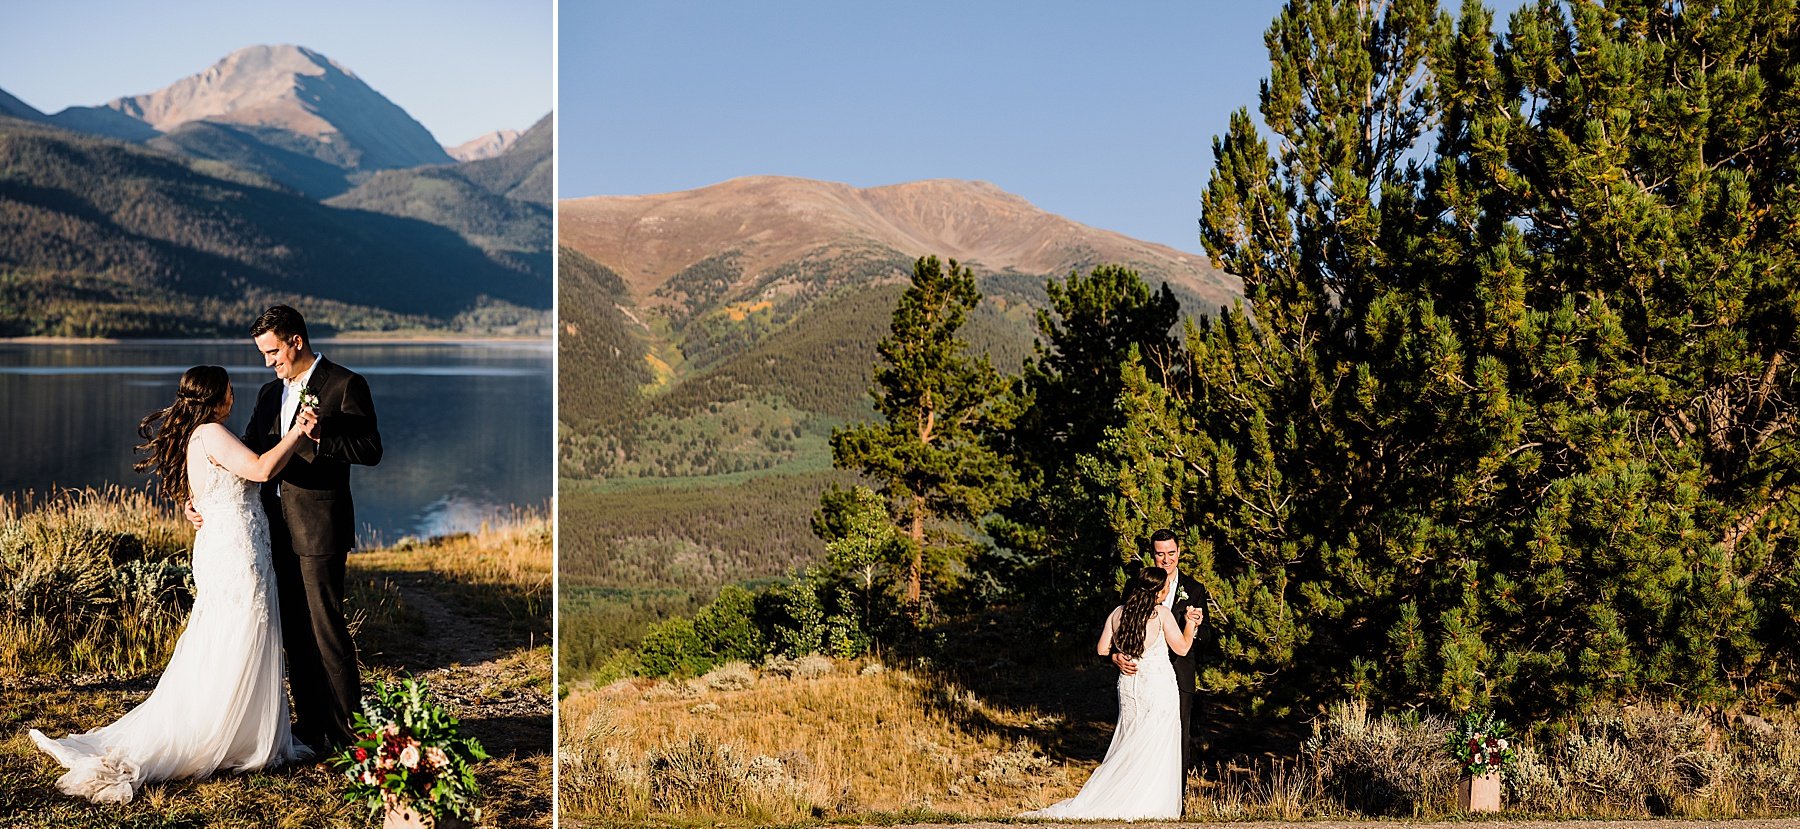 Dog-Friendly Sunrise Elopement at an Alpine Lake in Colorado